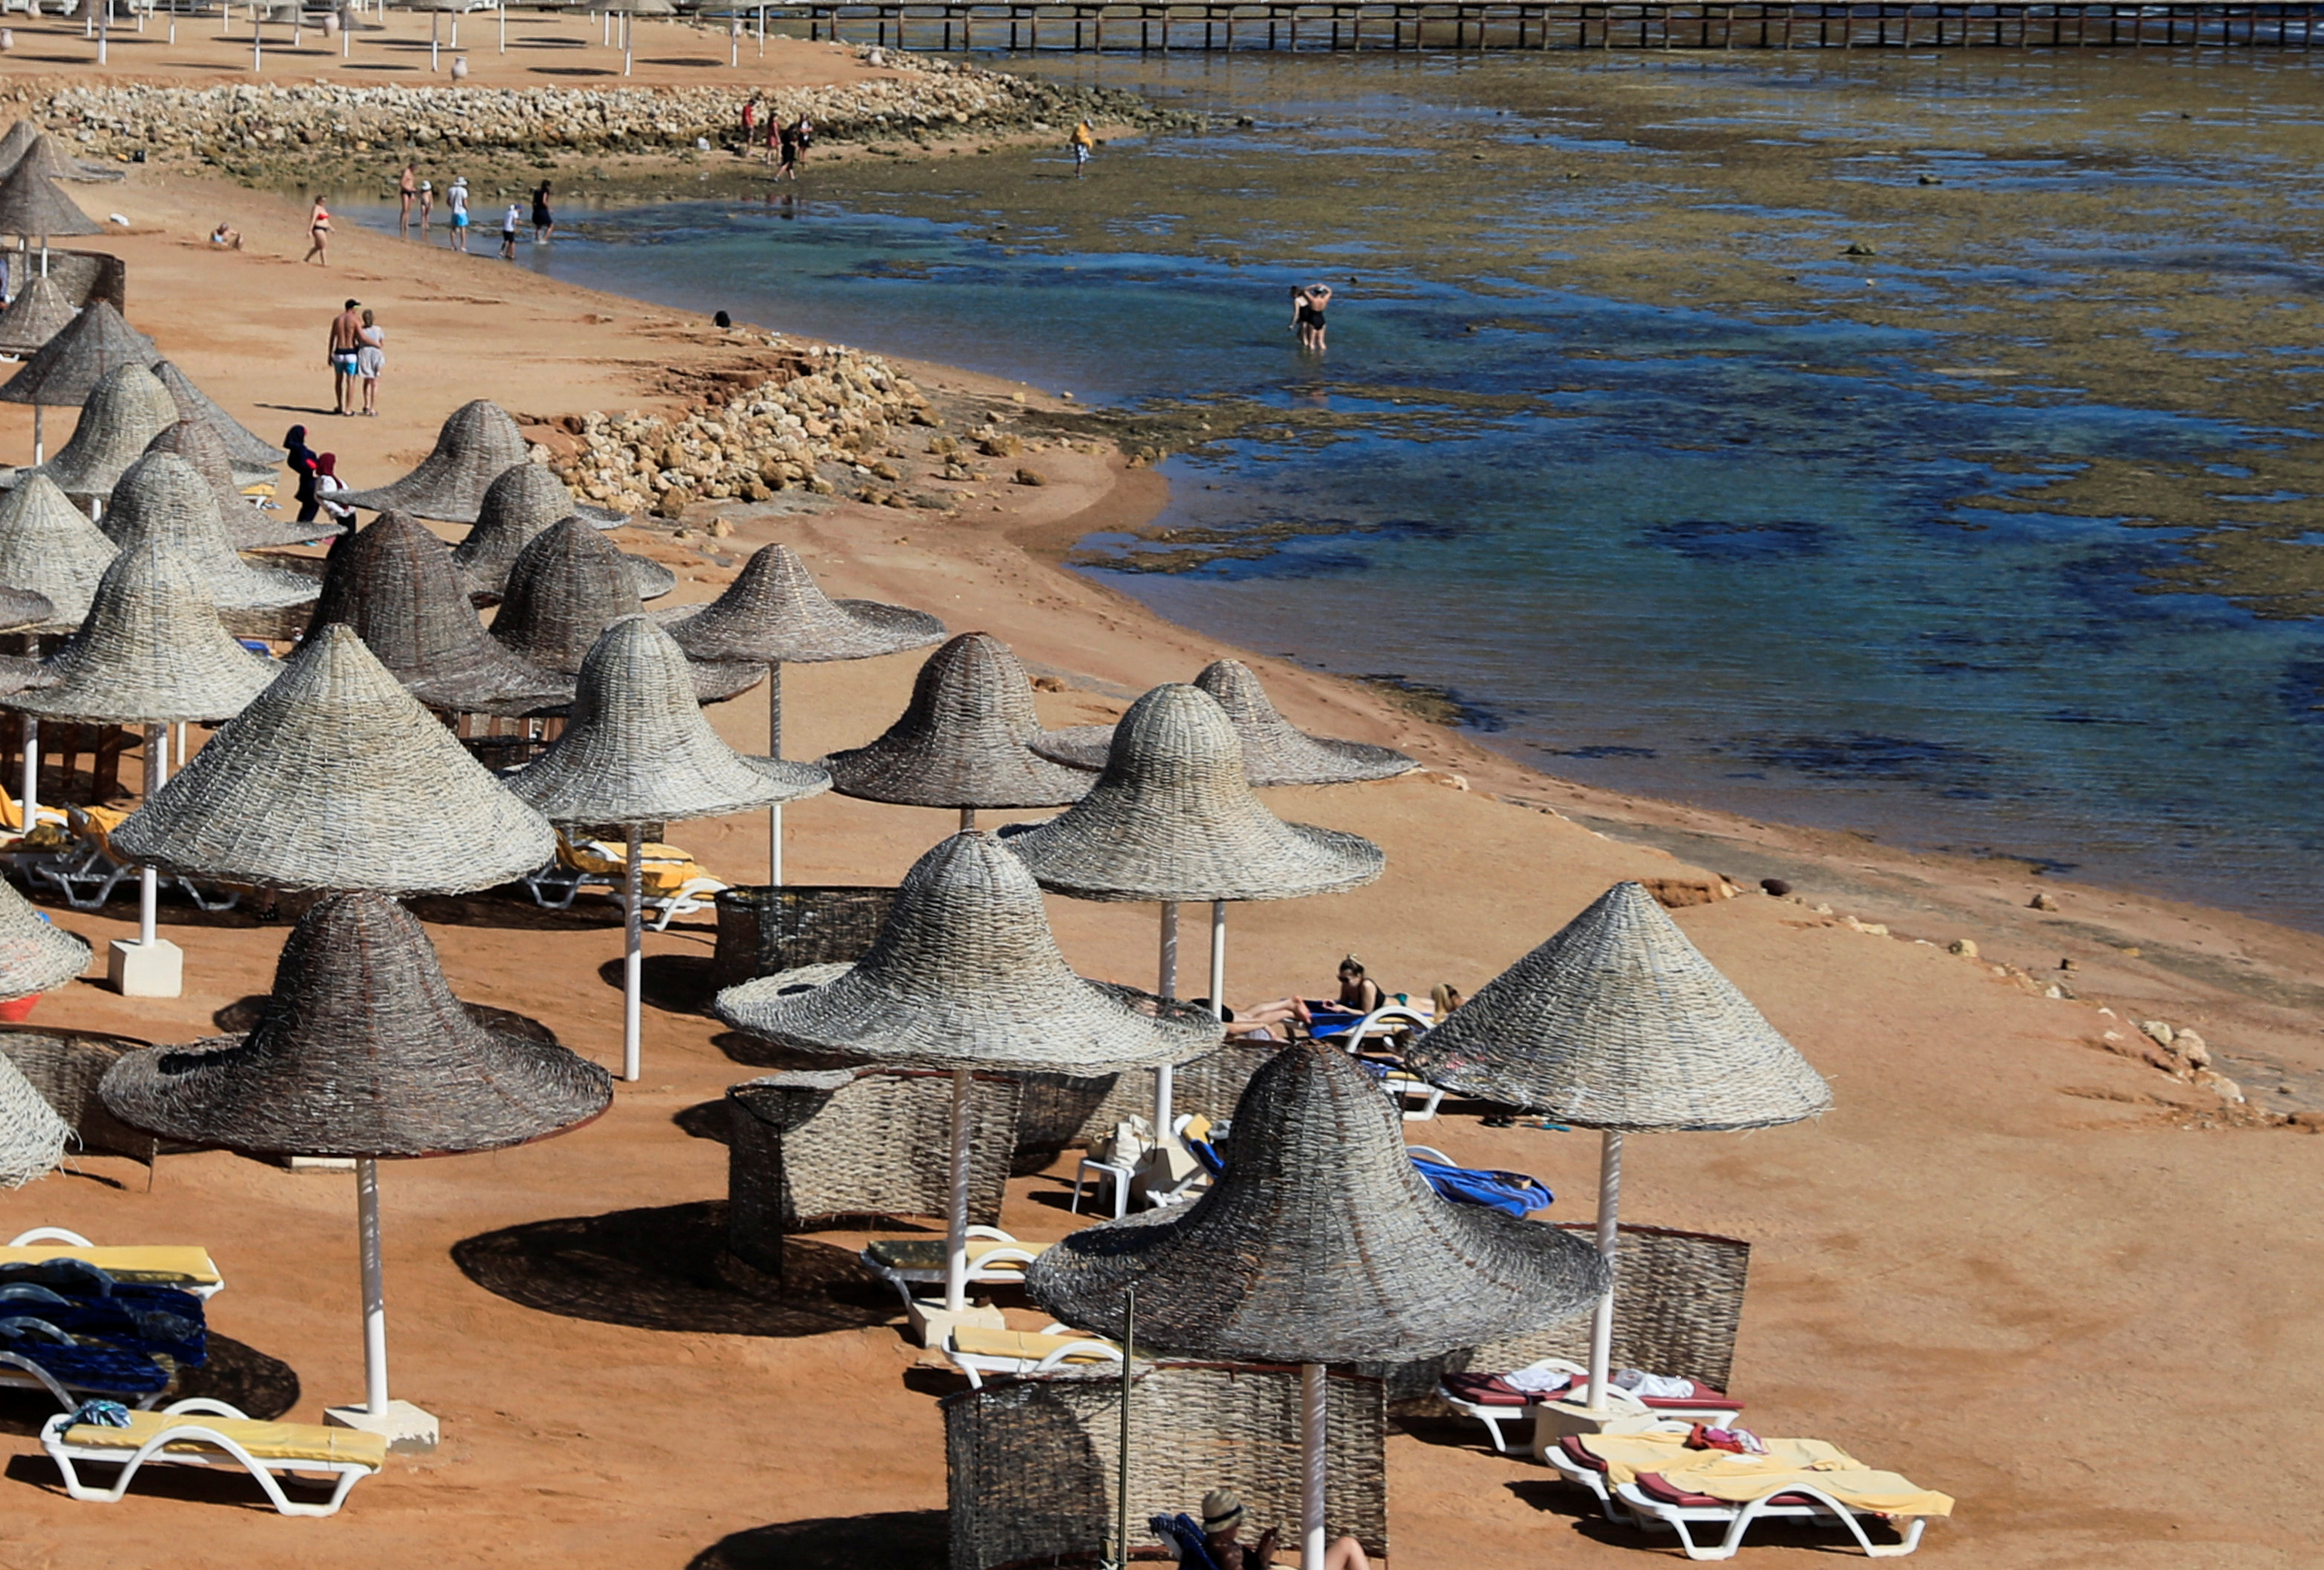 Tourists enjoy a day by the beach during a low tide in the Red Sea resort of Sharm el-Sheikh